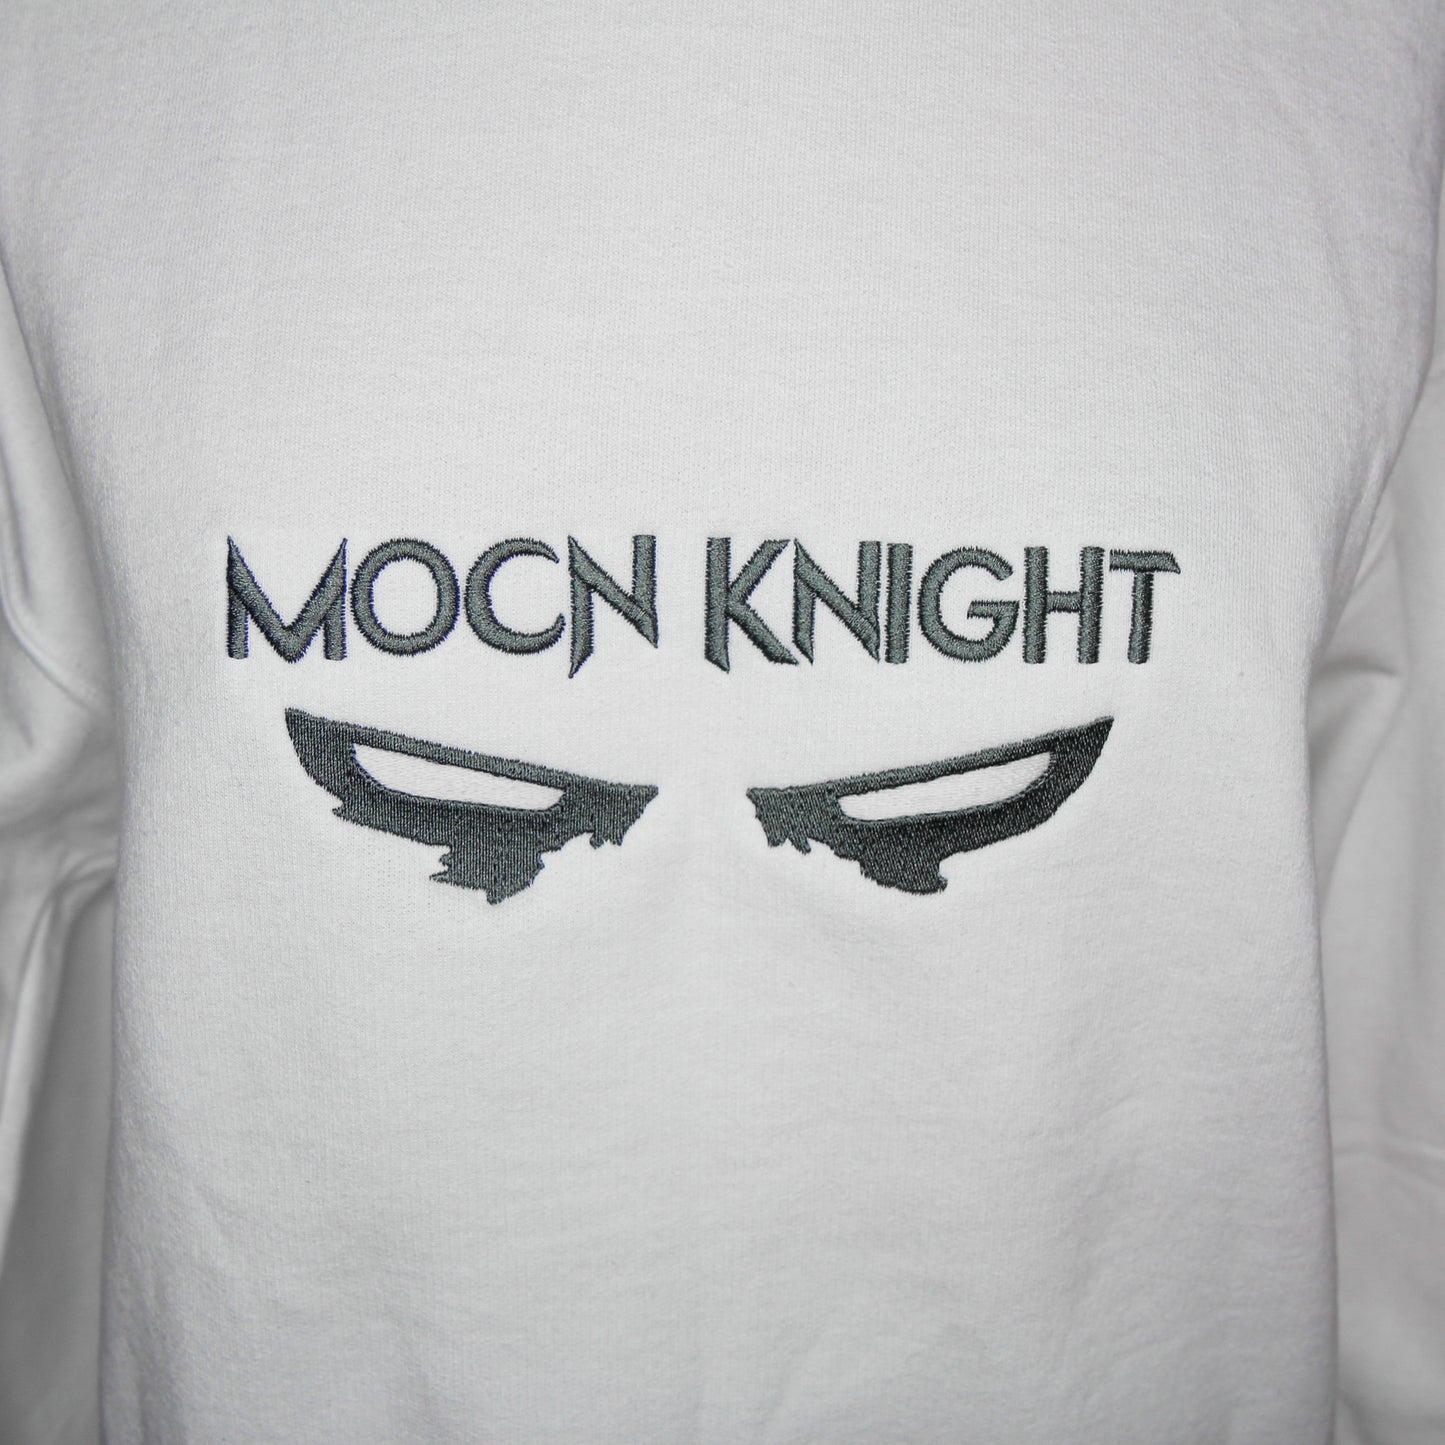 Moon Knight Crewneck With Glow In The Dark Eyes